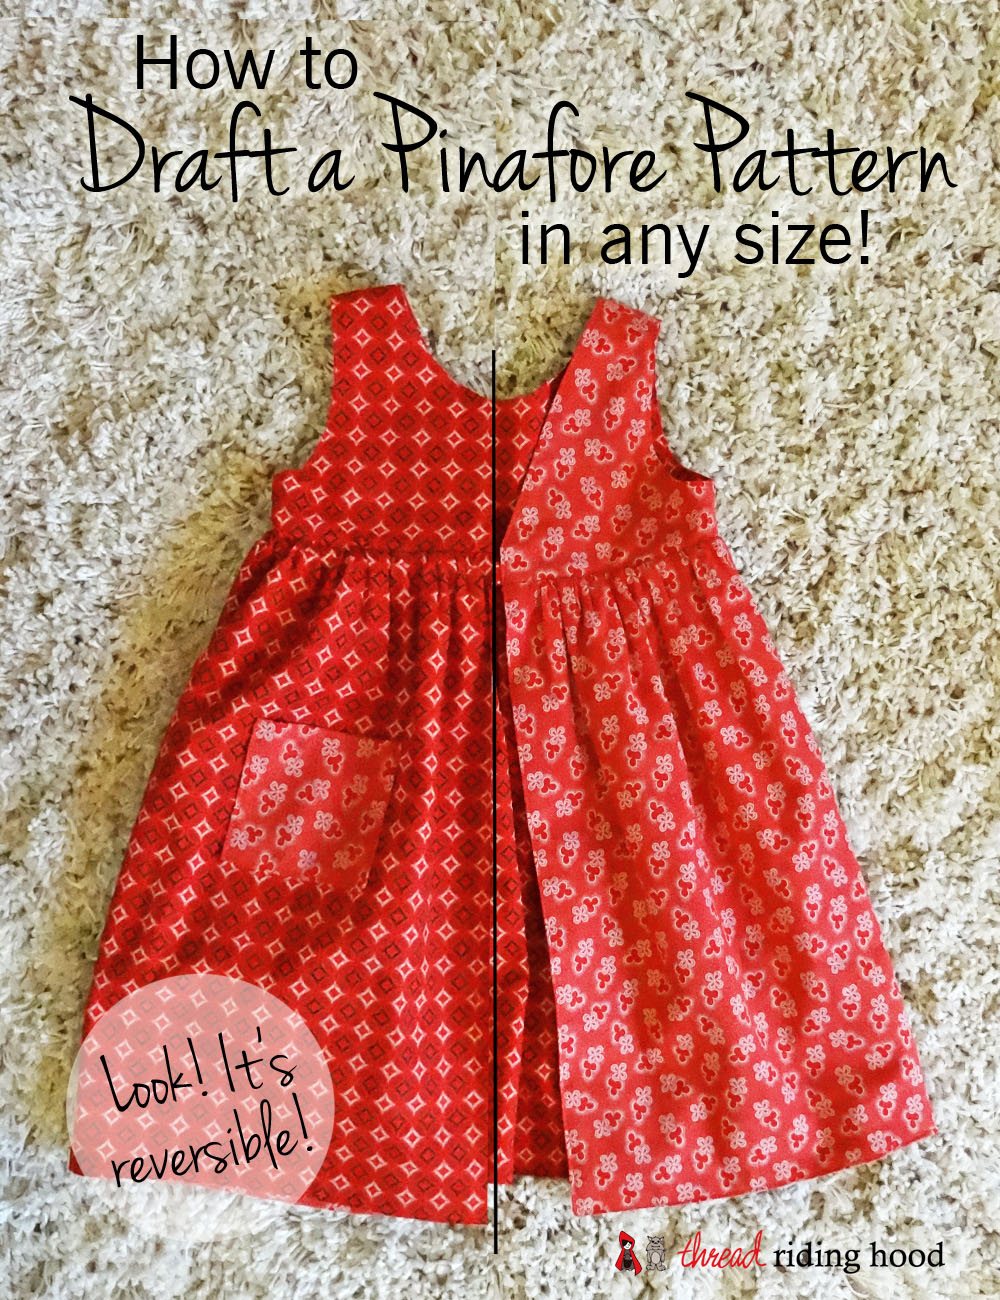 Draft a Pinafore Pattern in any size!